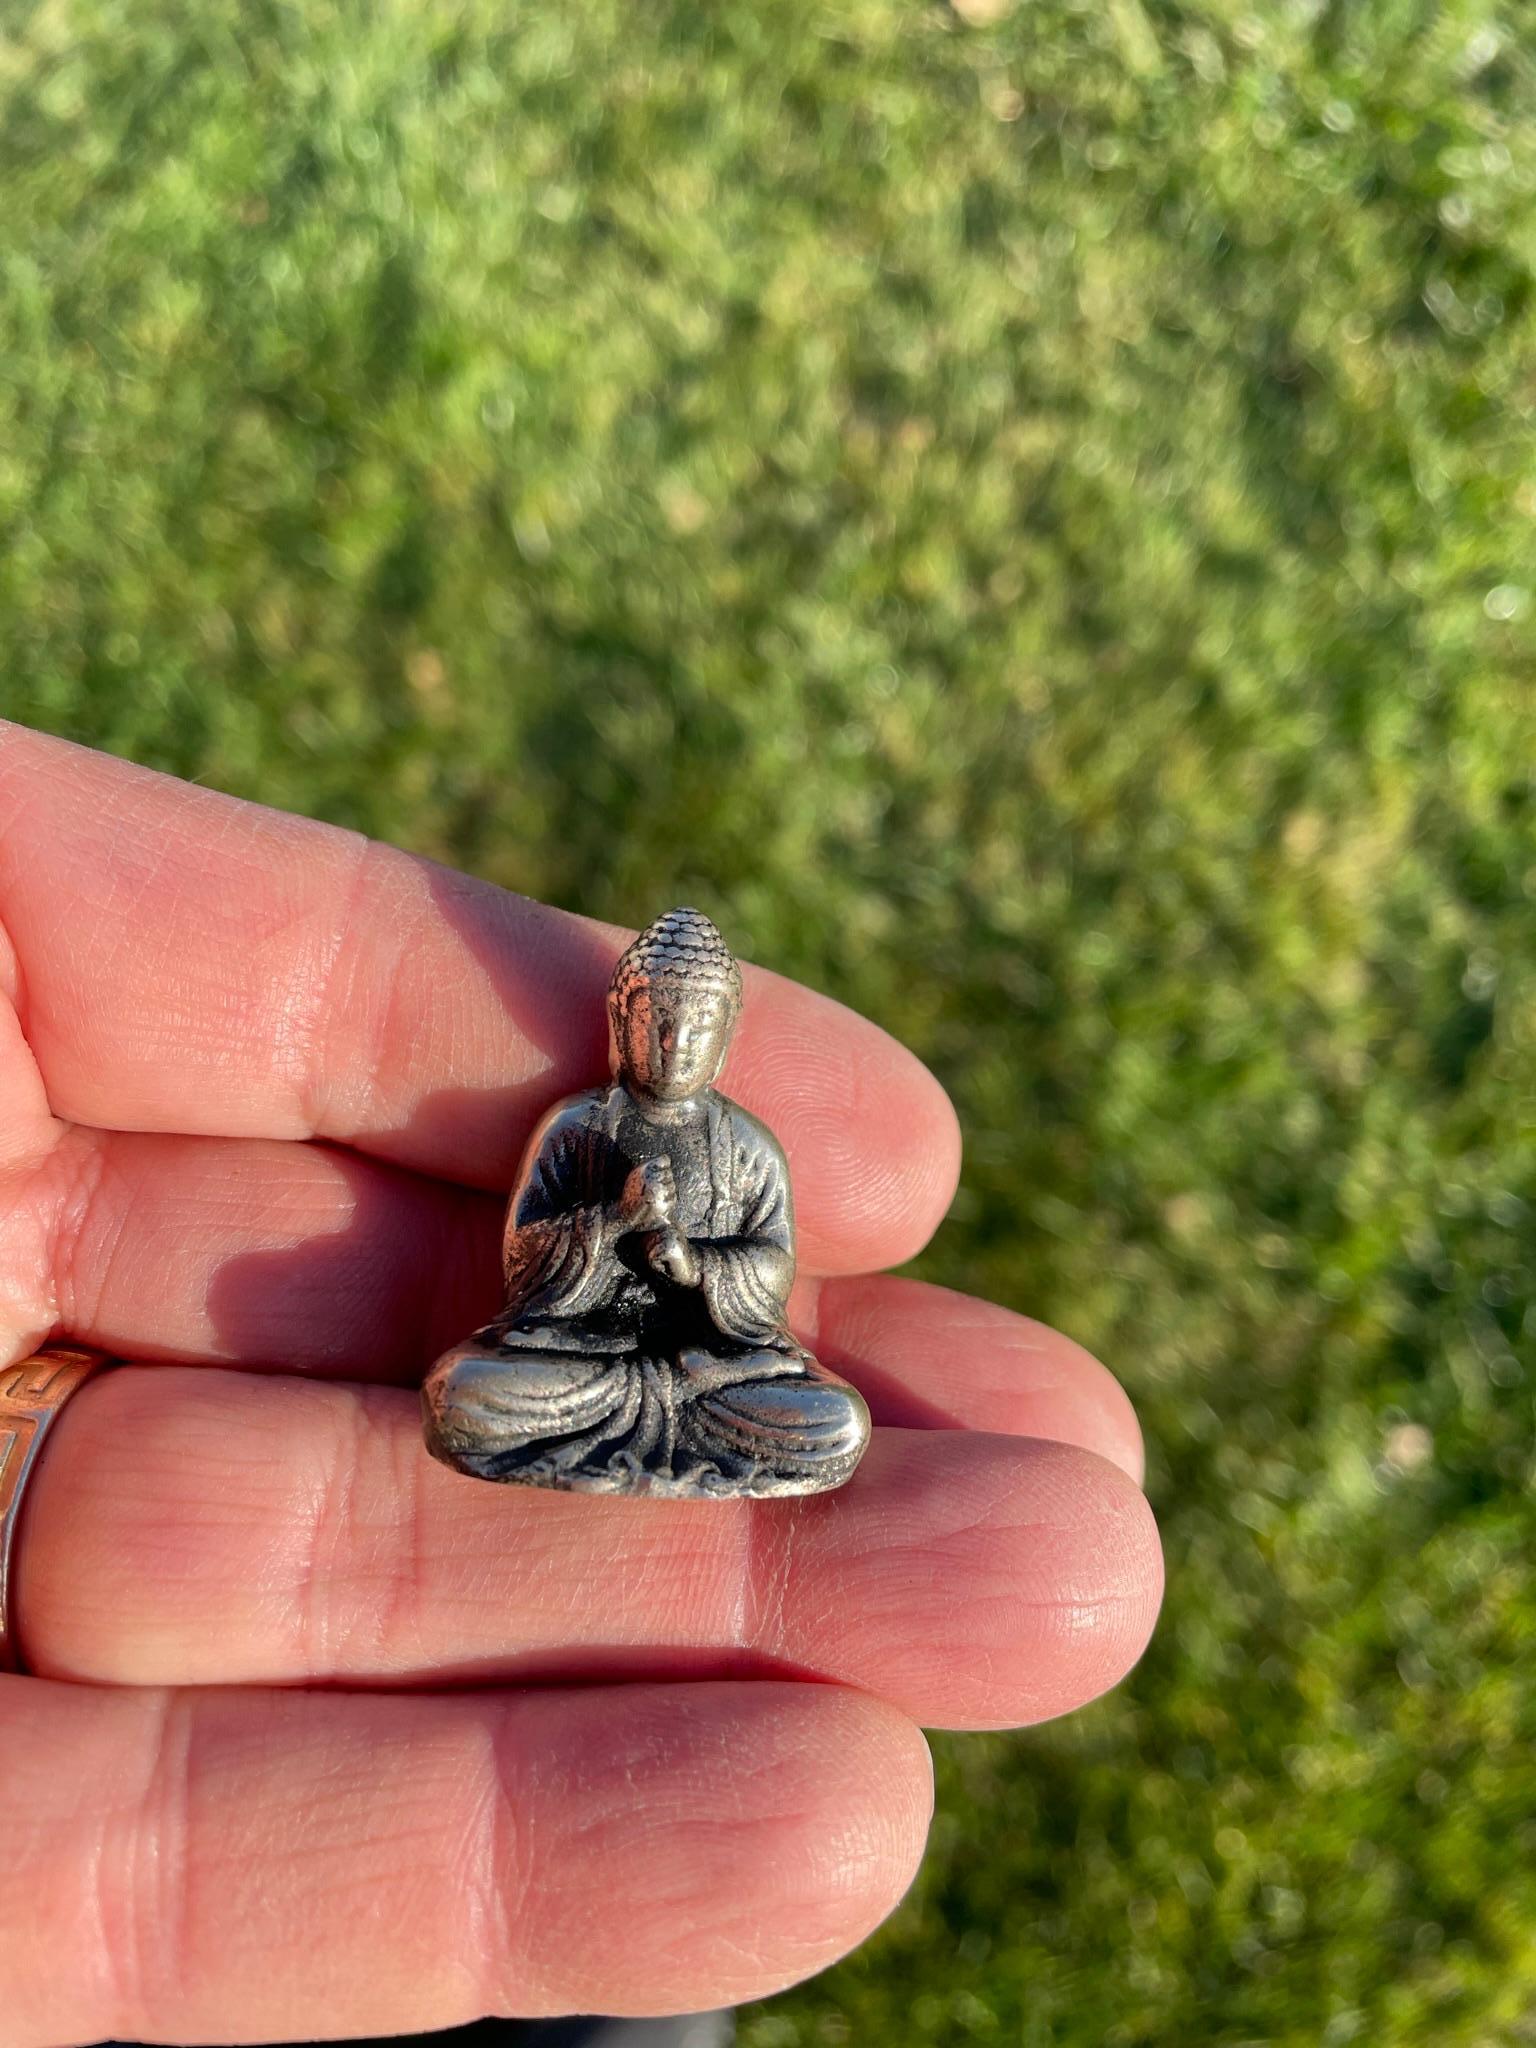 Taisho Japan Special Old Sterling Silver Buddha of Supreme Wisdom